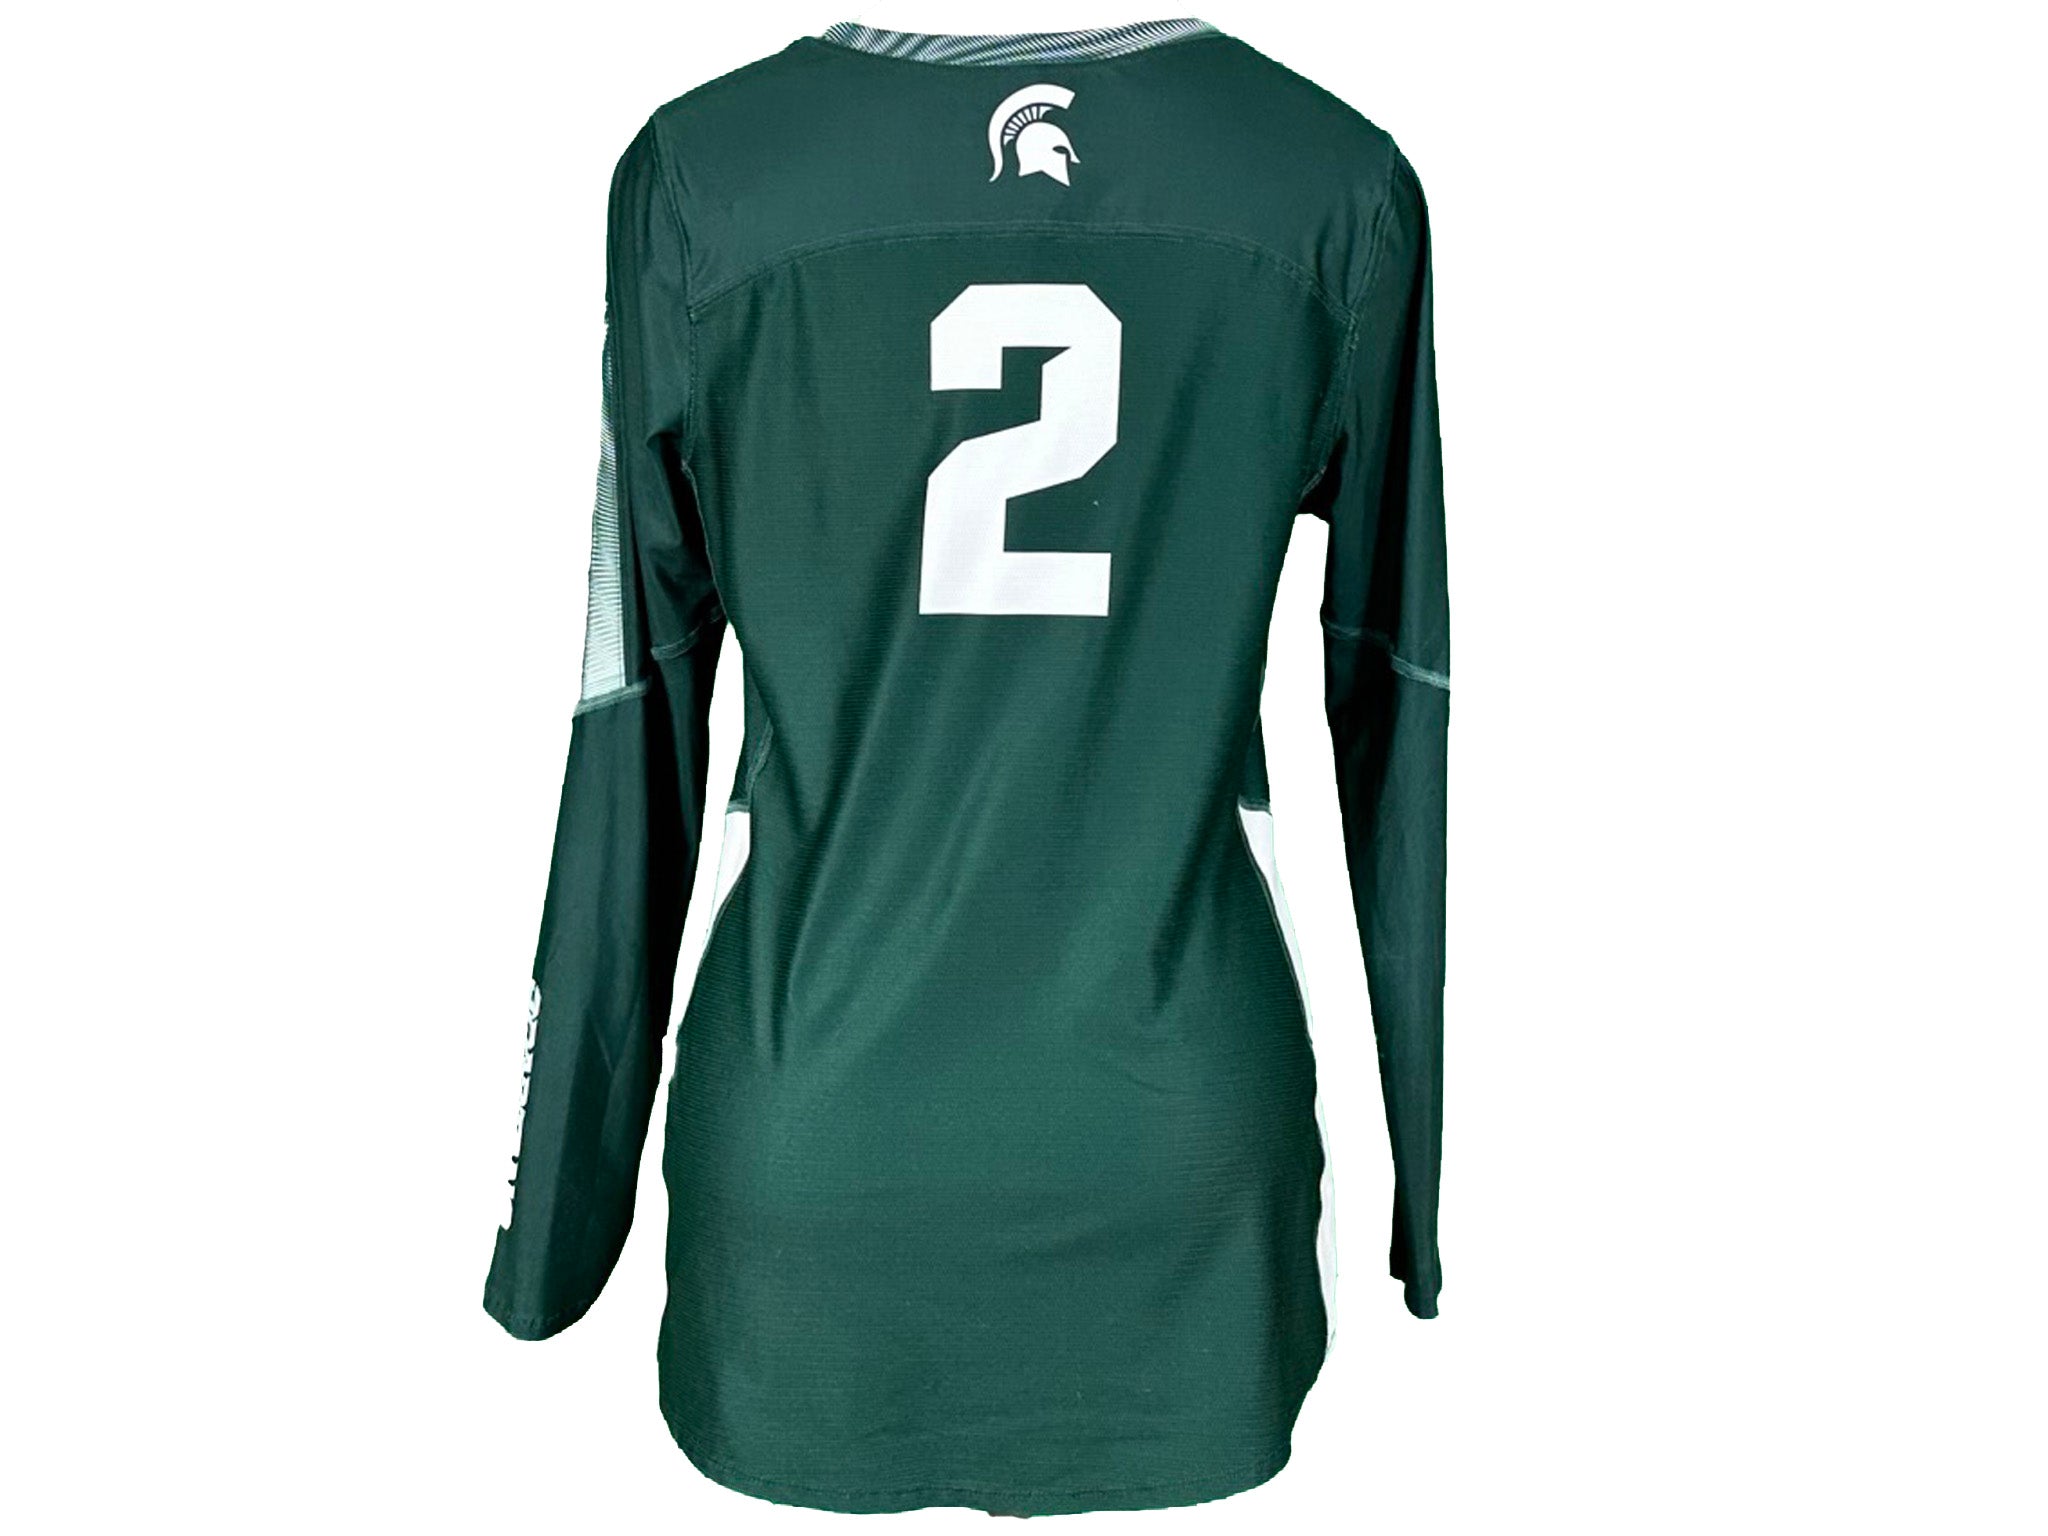 Nike Green 2018-2021 Long Sleeve Volleyball Jersey #2 w/ Patch Women's Size M